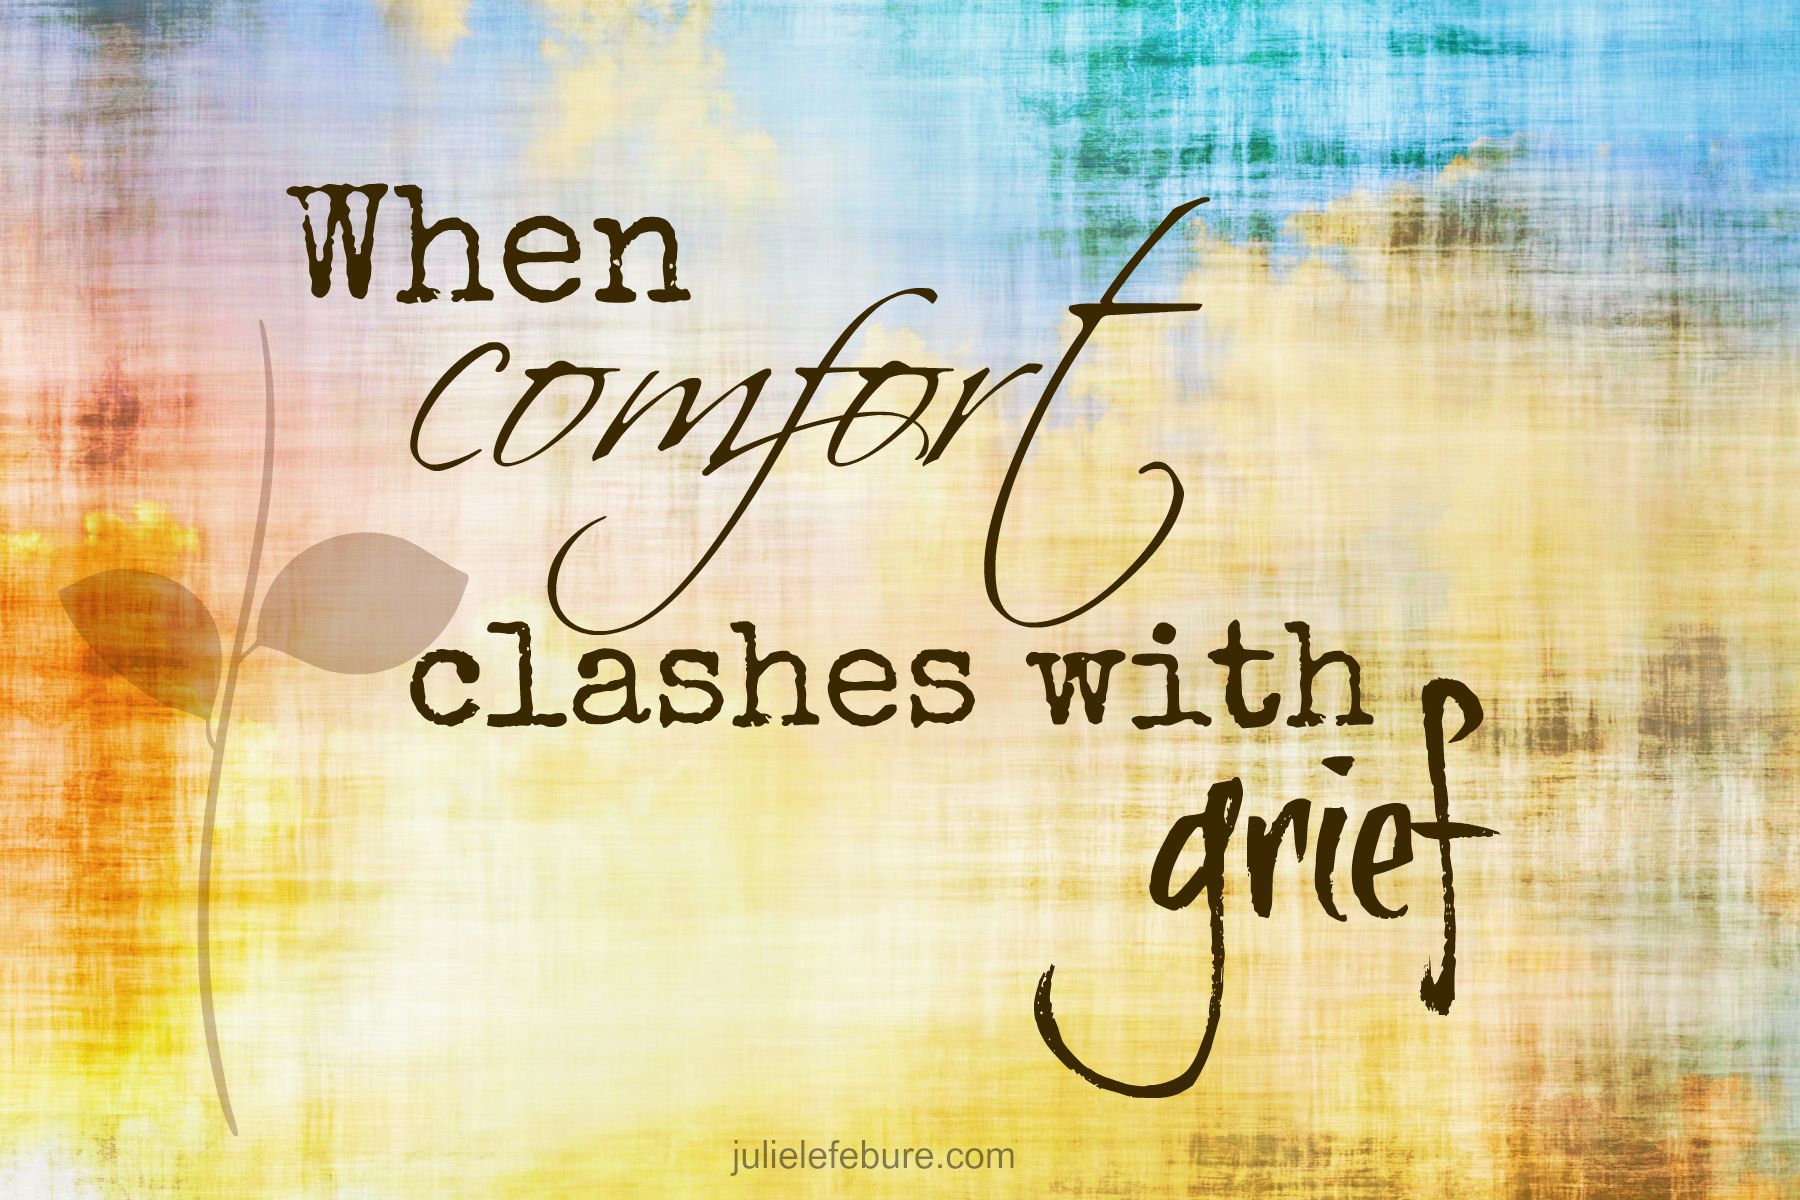 When Comfort Clashes With Grief